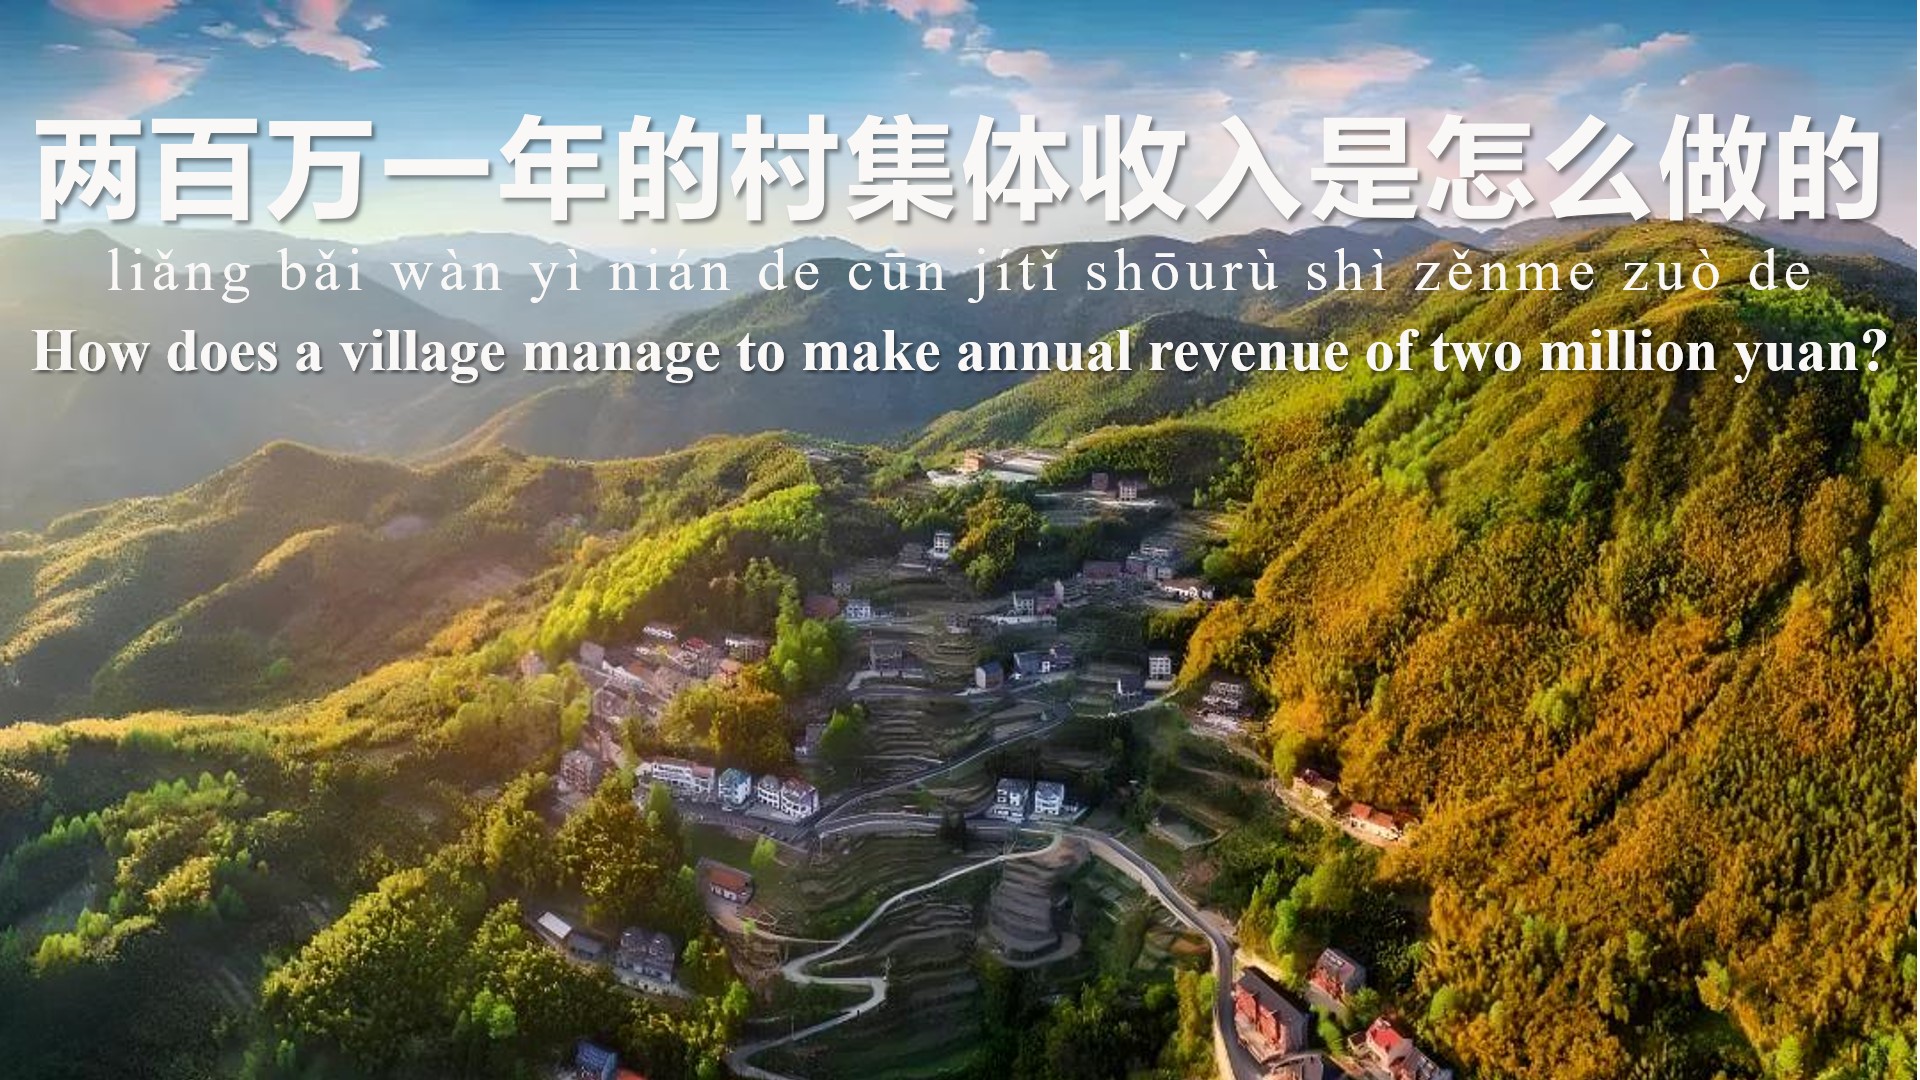 How does a village manage to make annual revenue of two million yuan?